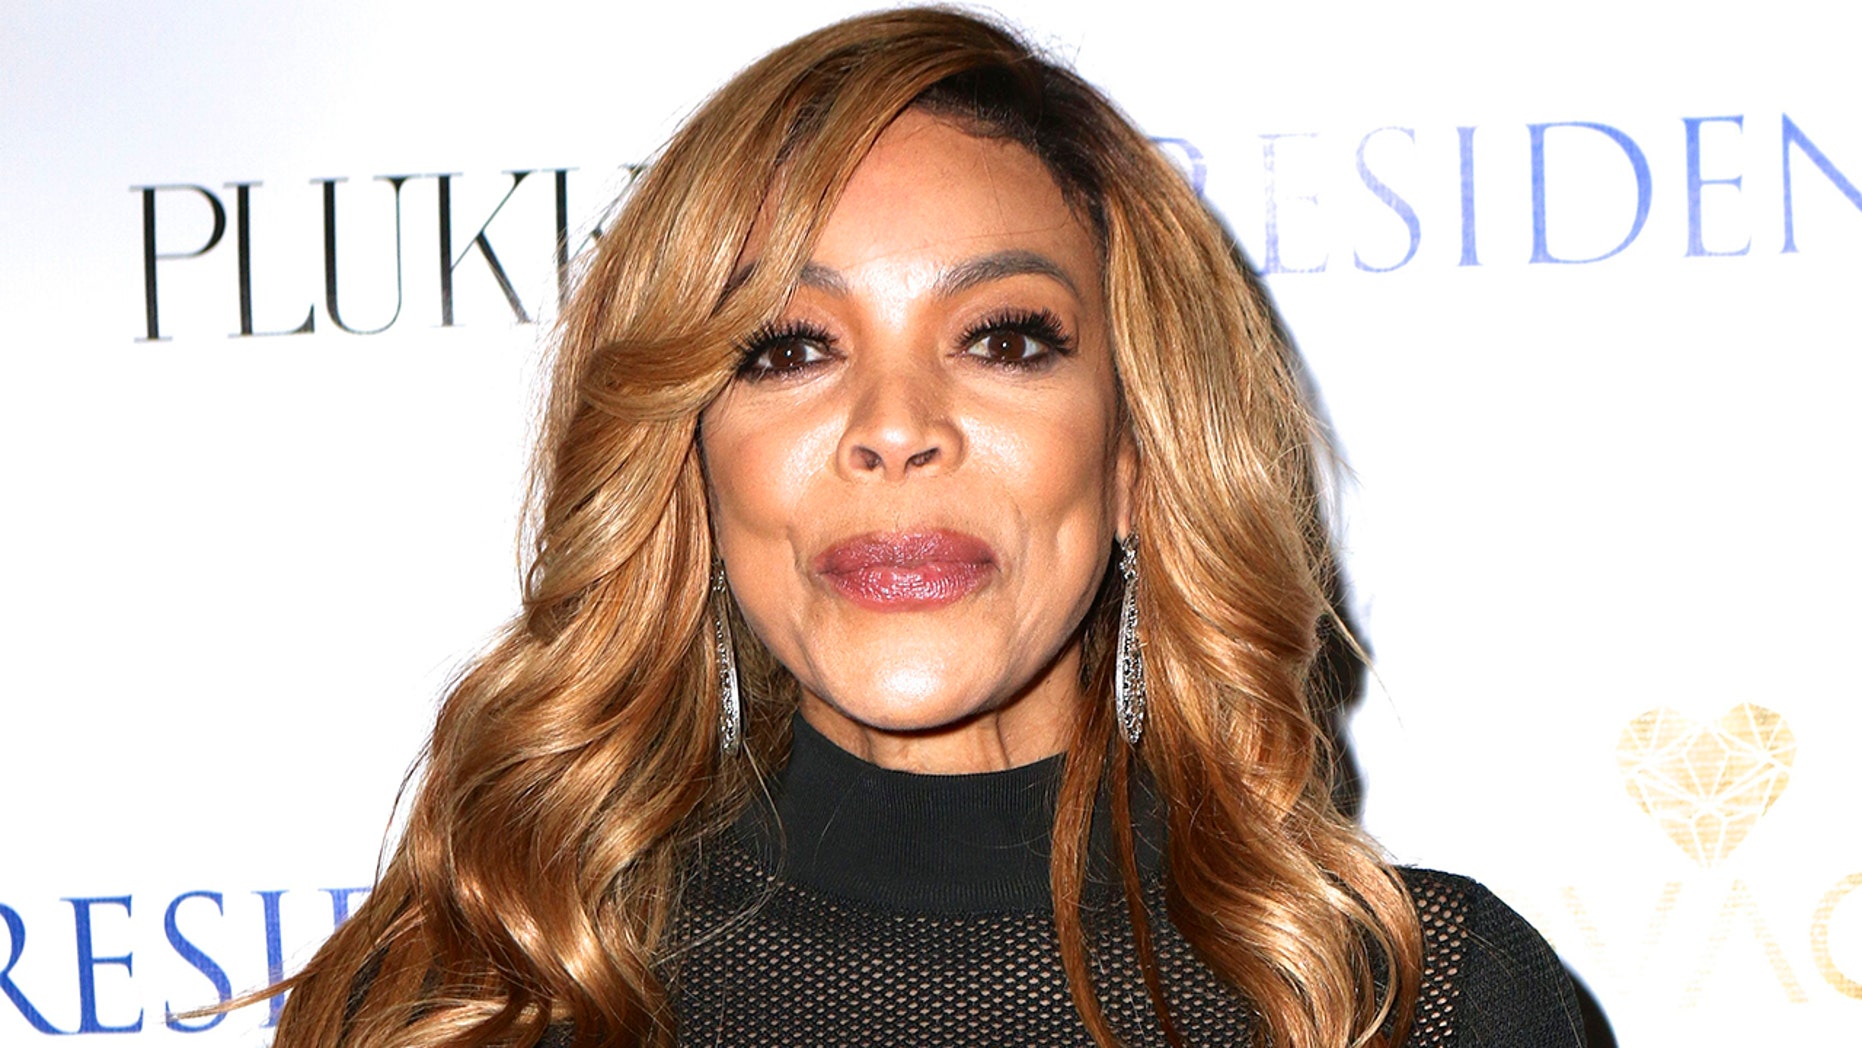 Wendy Williams to take health-related break from TV show, will spend ‘significant time’ in hospital